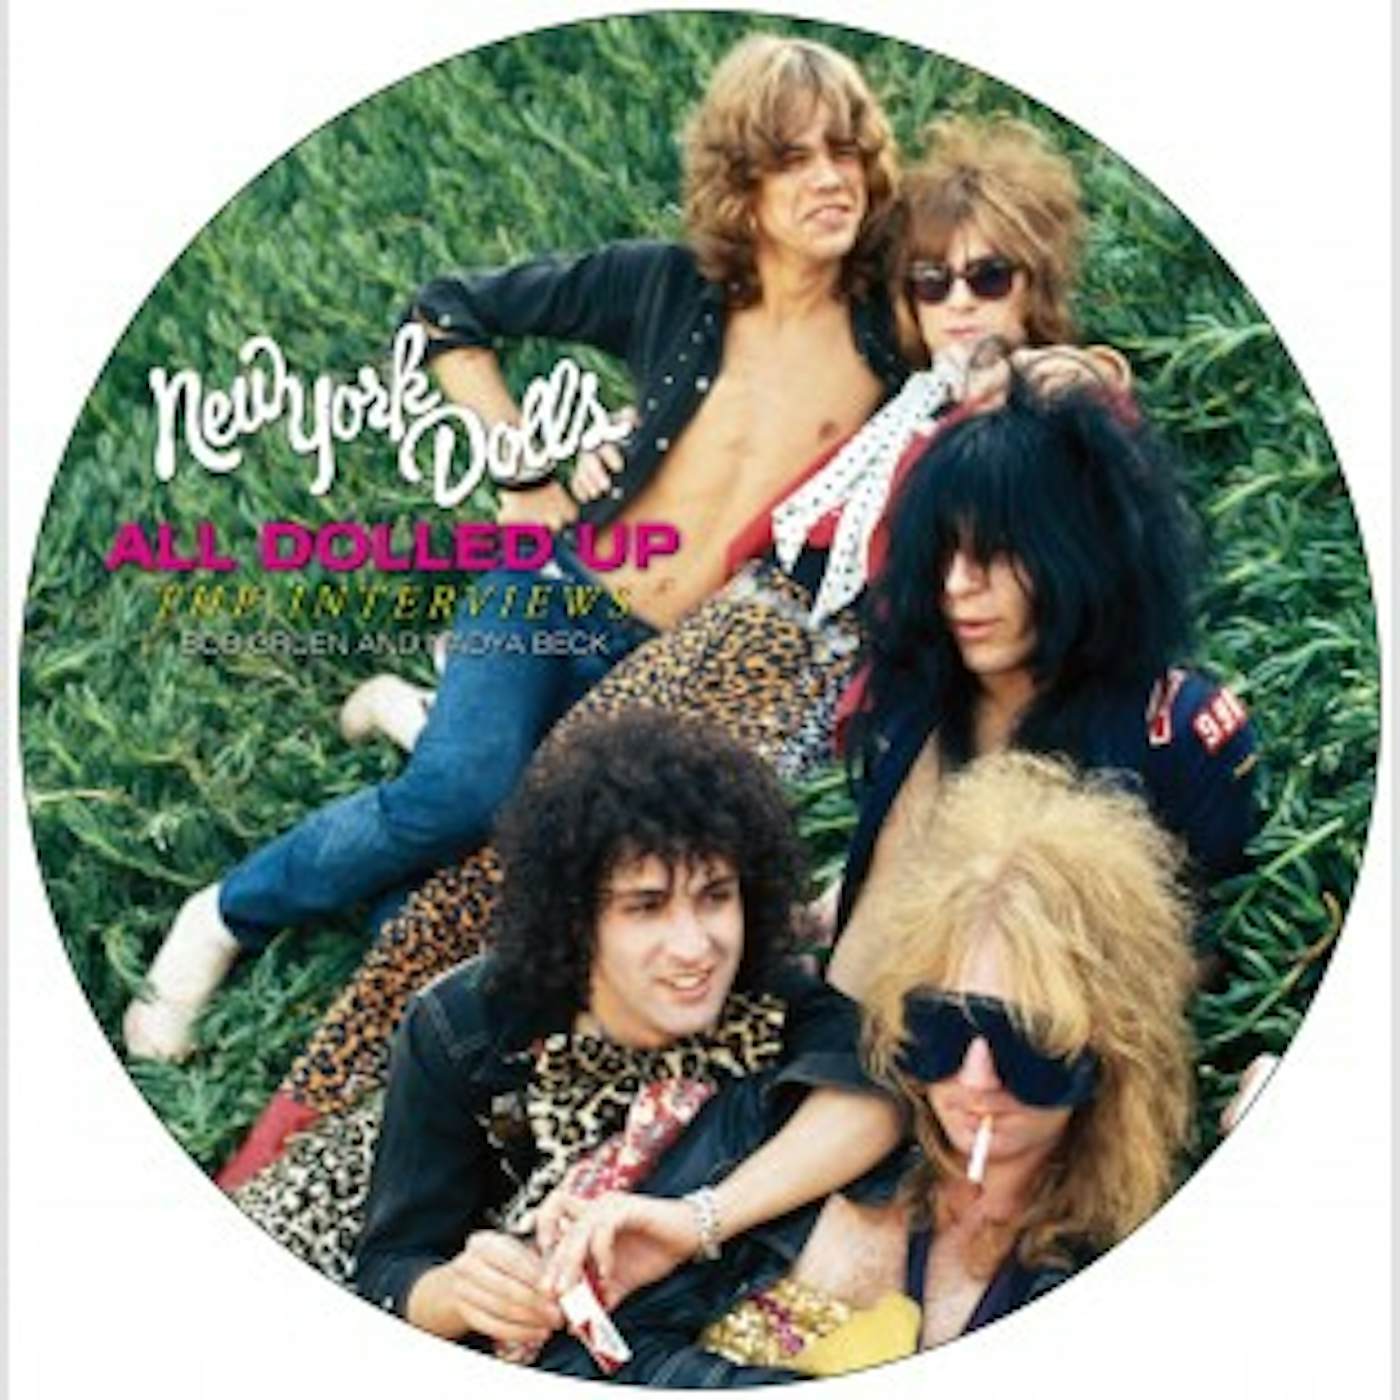 New York Dolls ALL DOLLED UP: INTERVIEW Vinyl Record